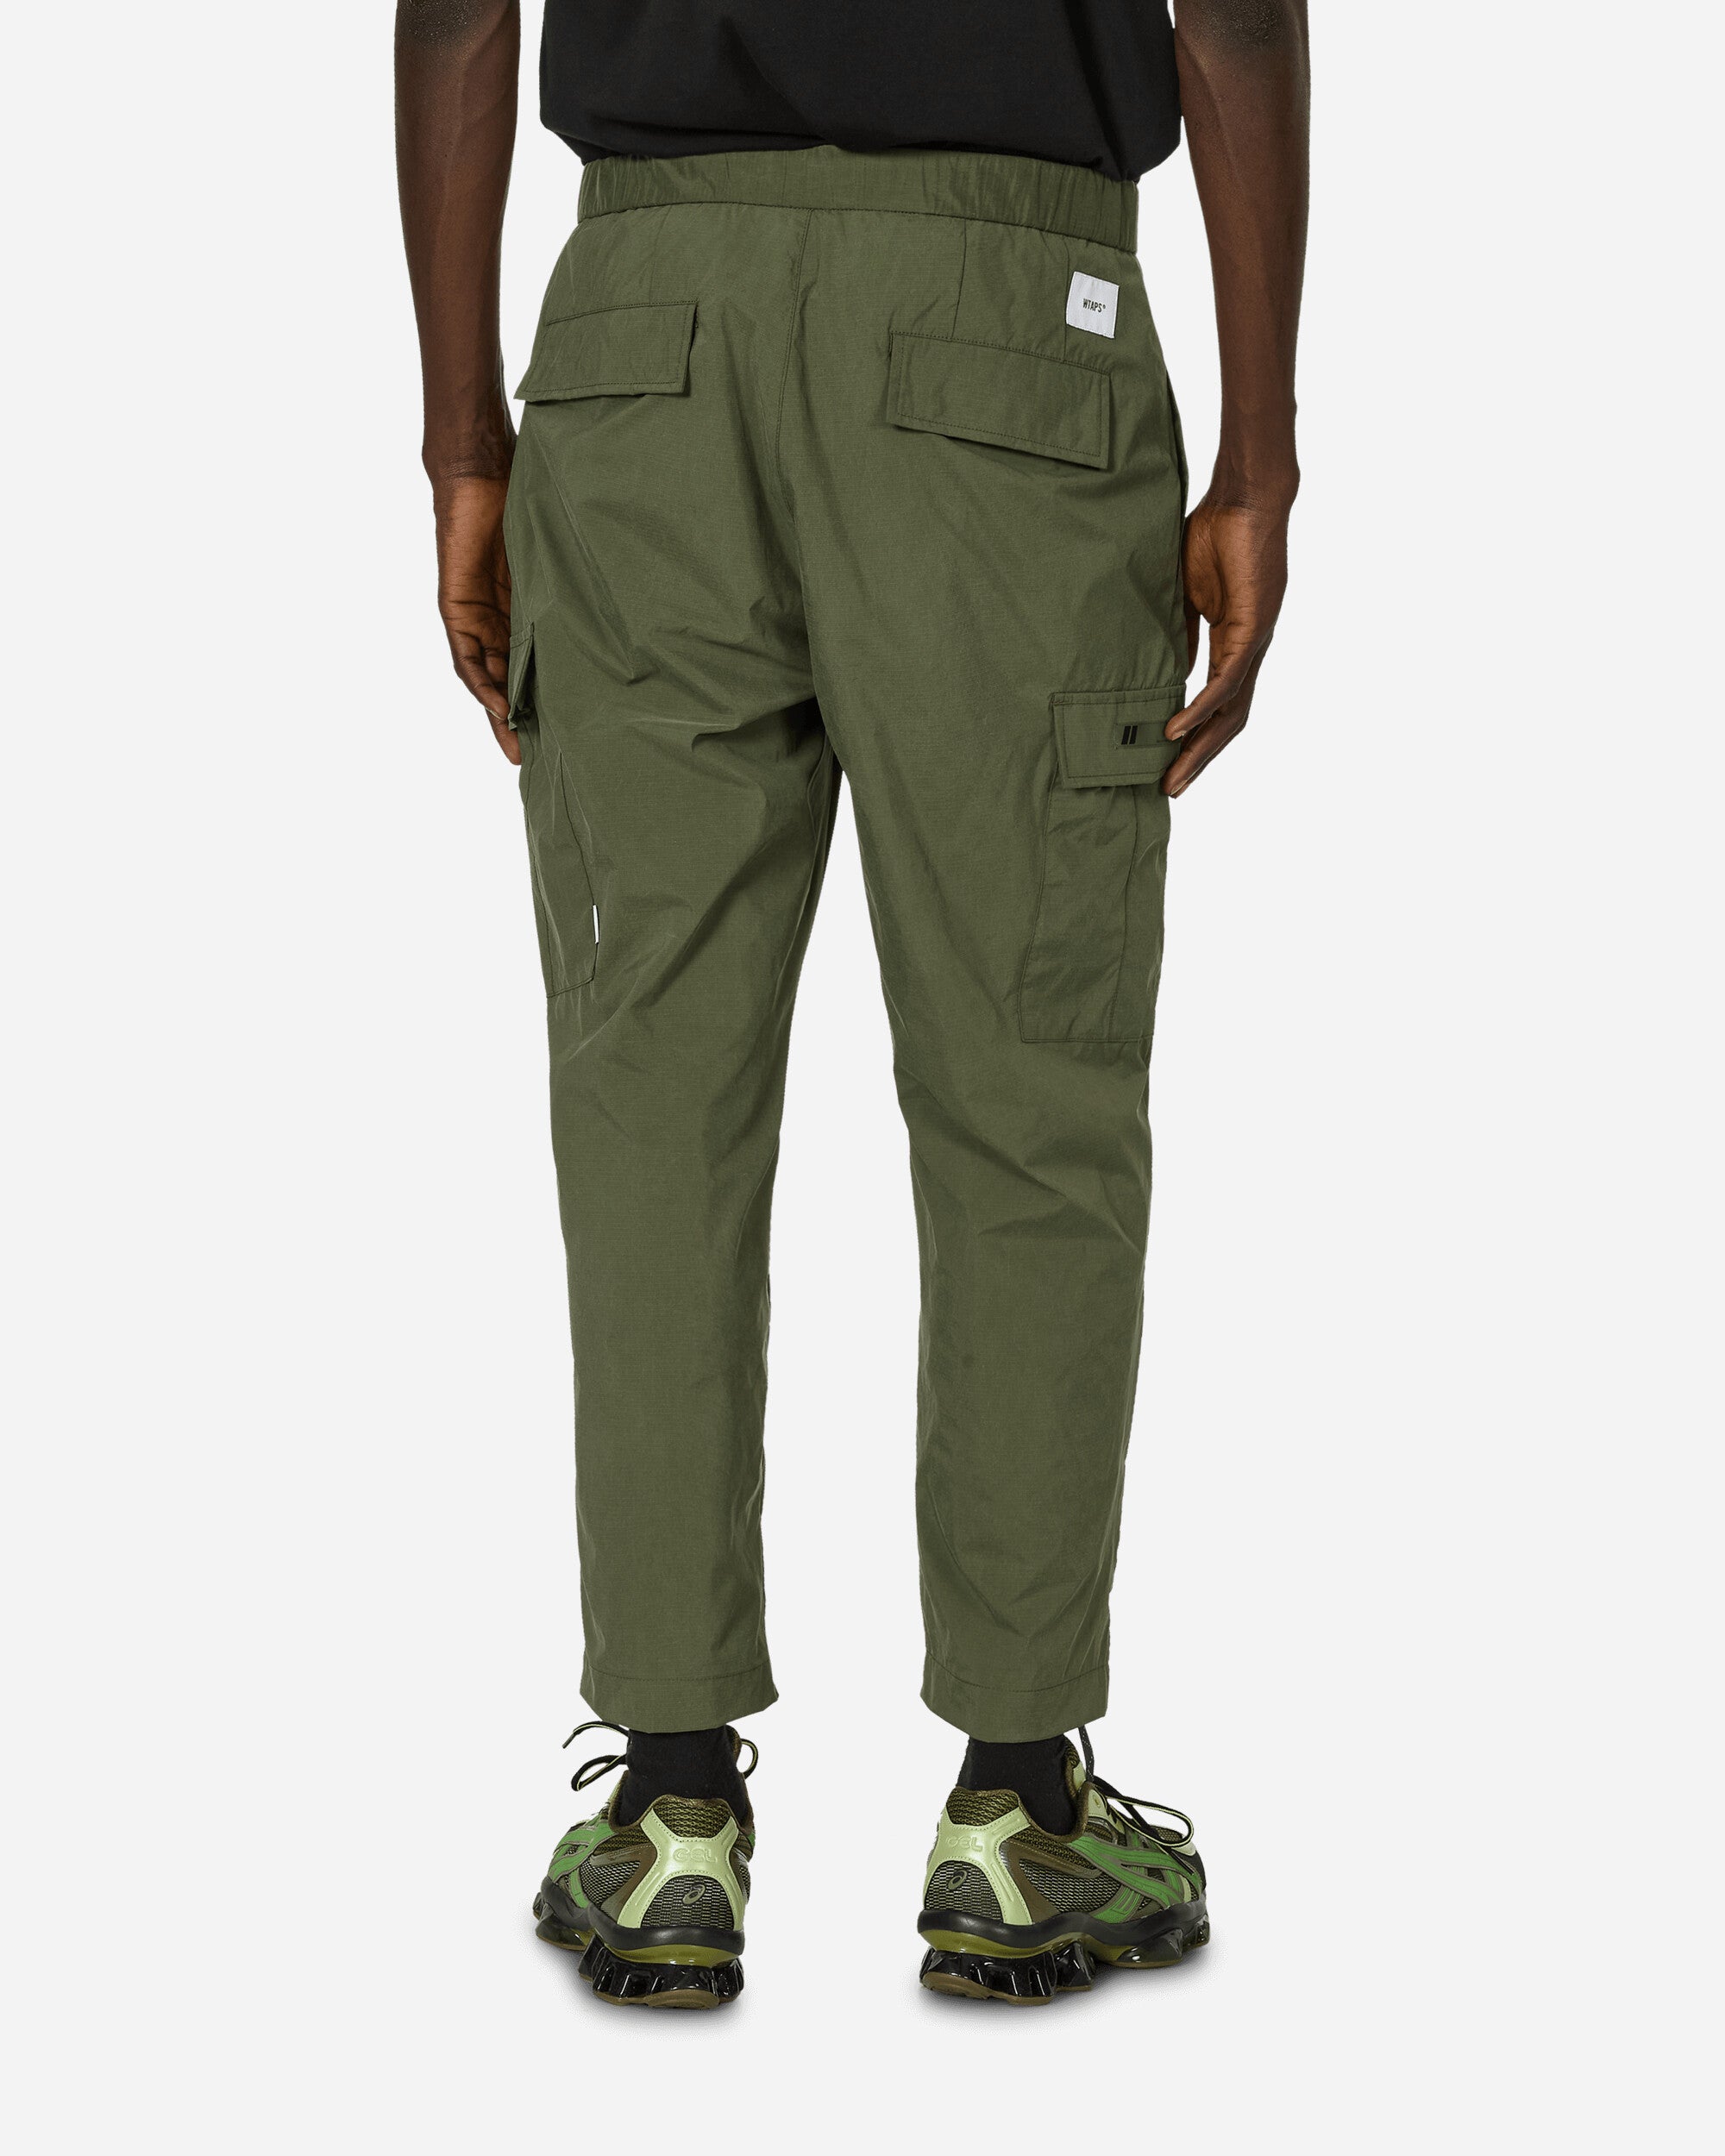 WTAPS Underwear Olive Drab Pants Casual 241CWDT-PTM02 ODR